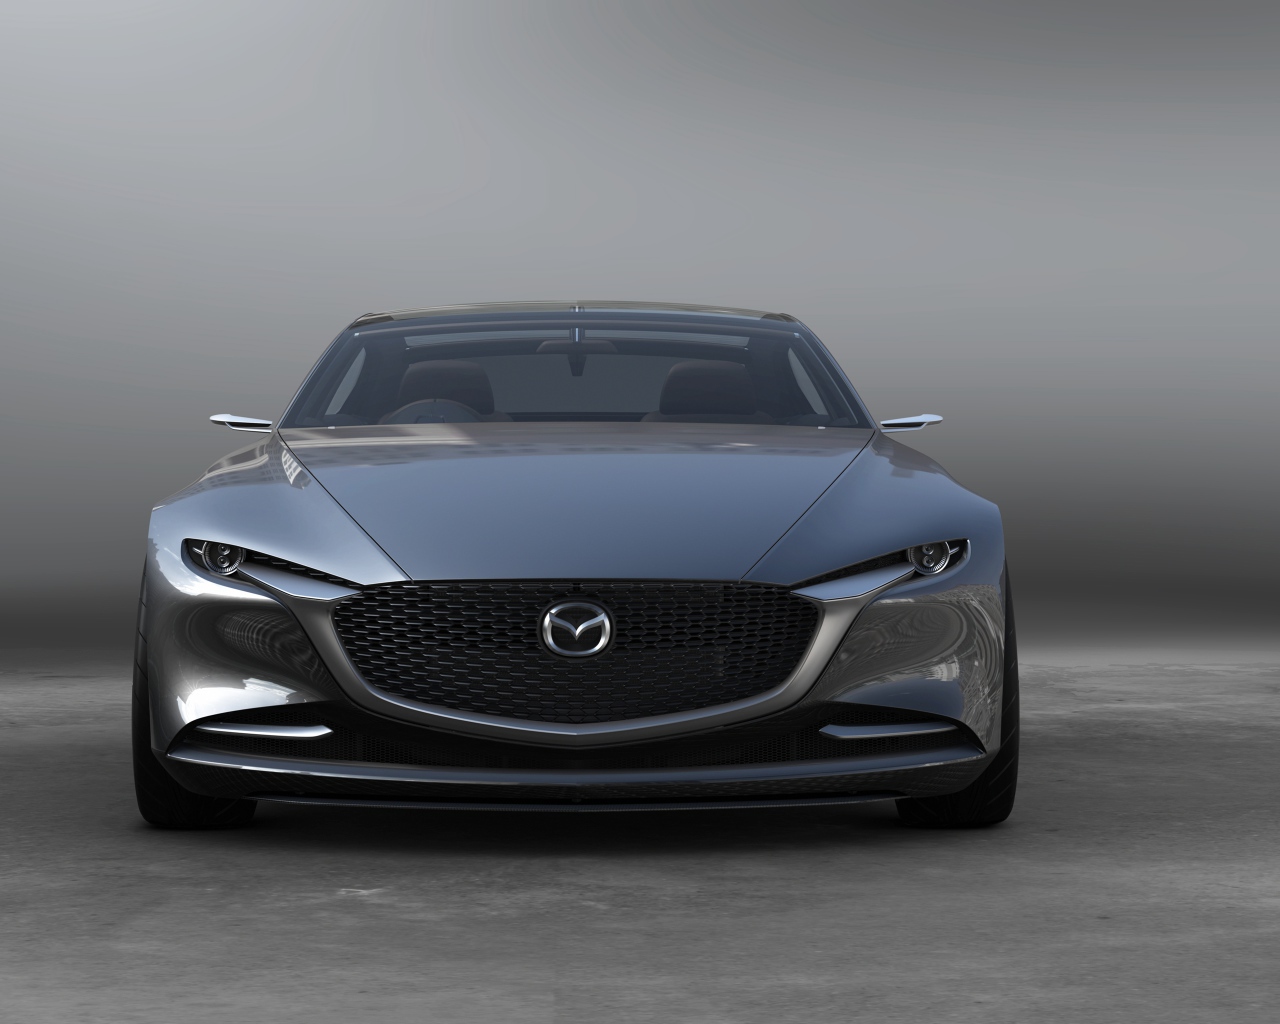 Silver car Mazda Vision Coupe, 2017 front view